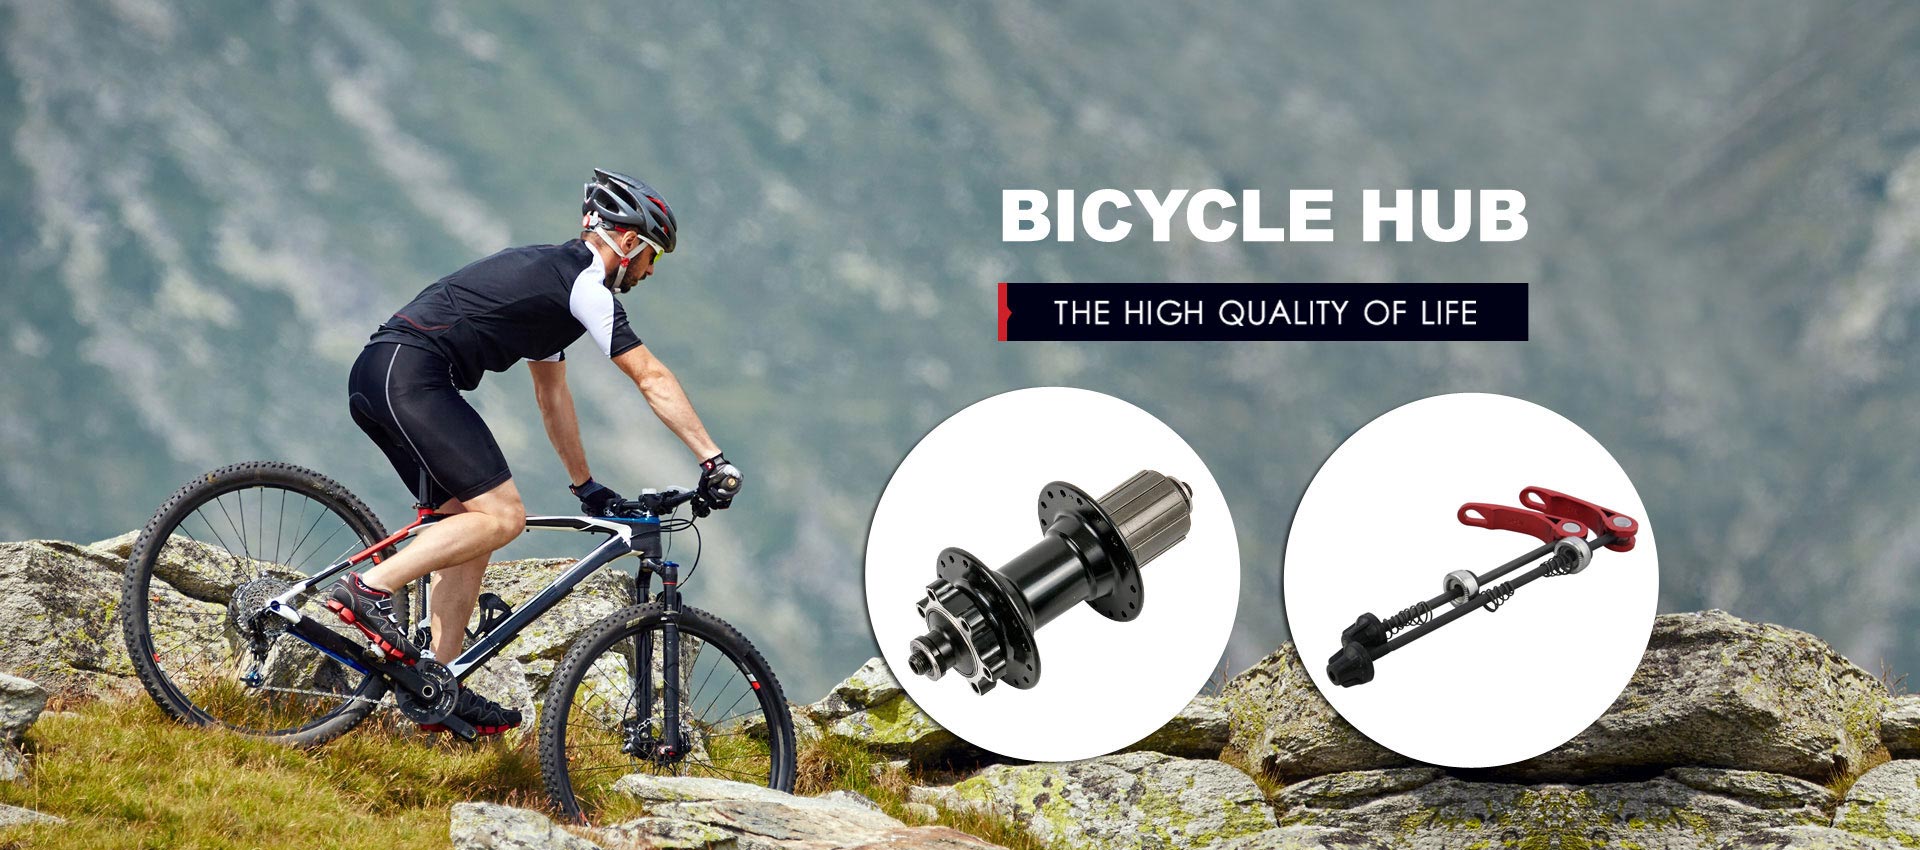 Wholesale Customized Bicycle Hub made in China